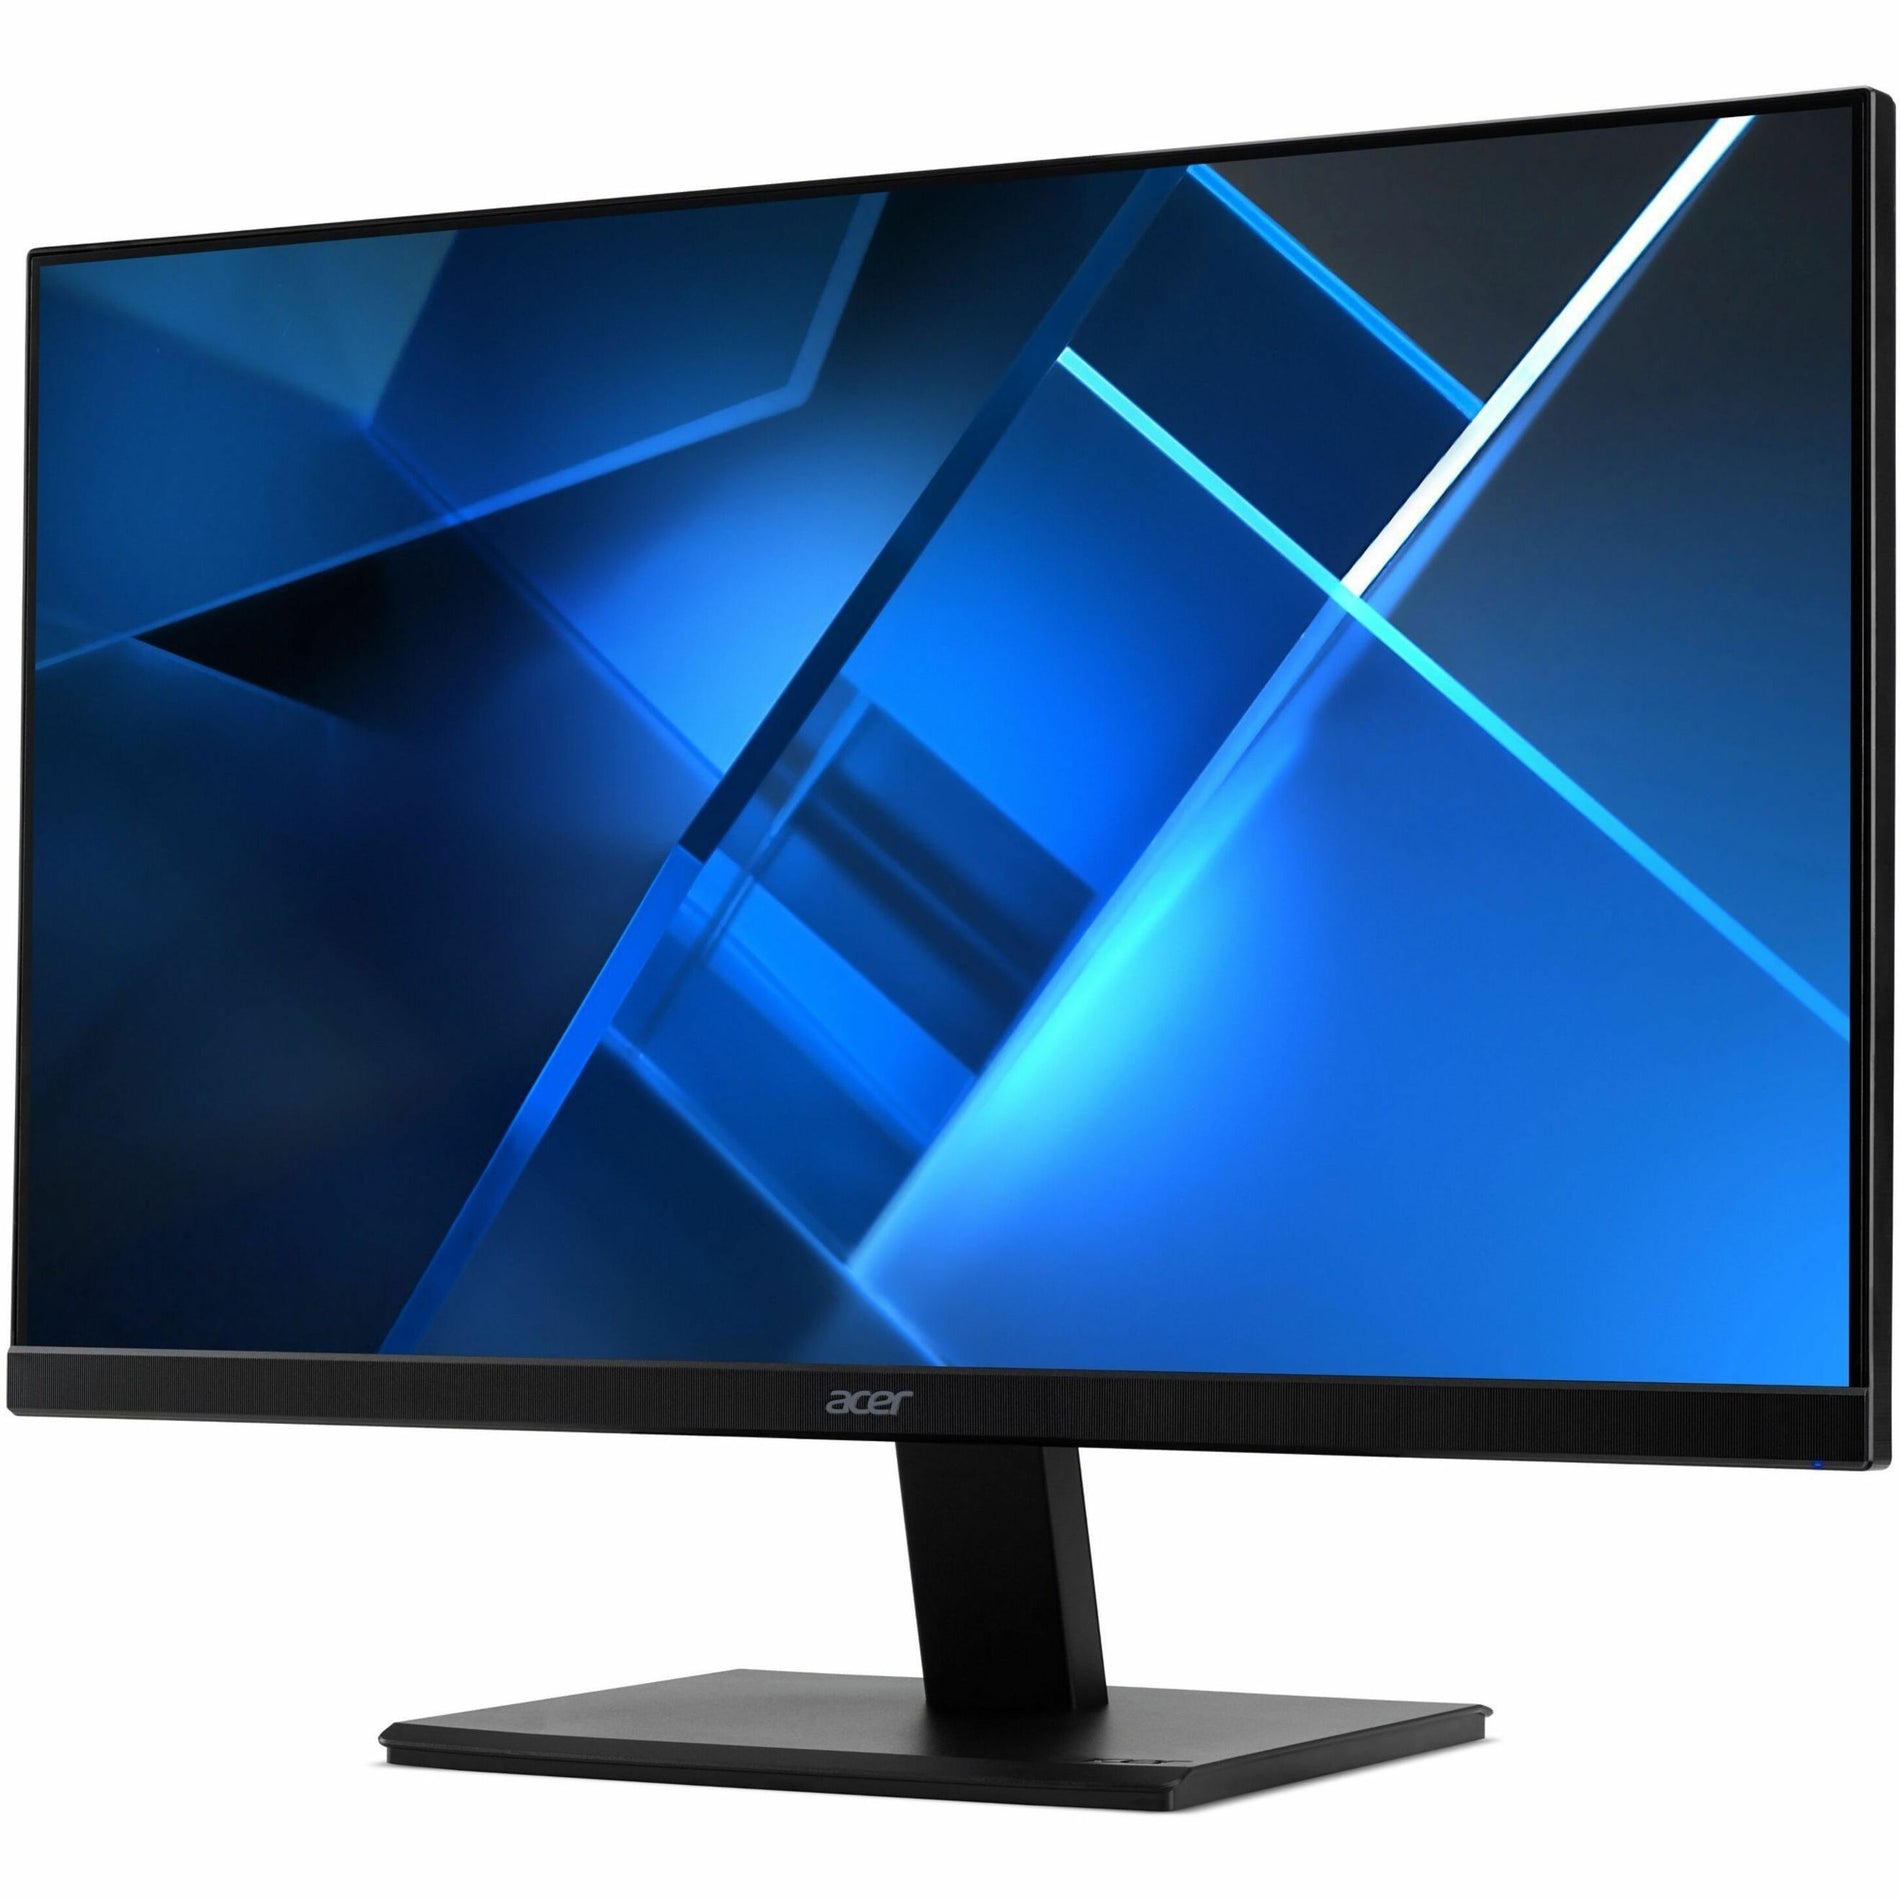 Acer UM.QV7AA.H01 V247Y H Widescreen LCD Monitor, 23.8", 4ms GTG, FreeSync, 250 Nit